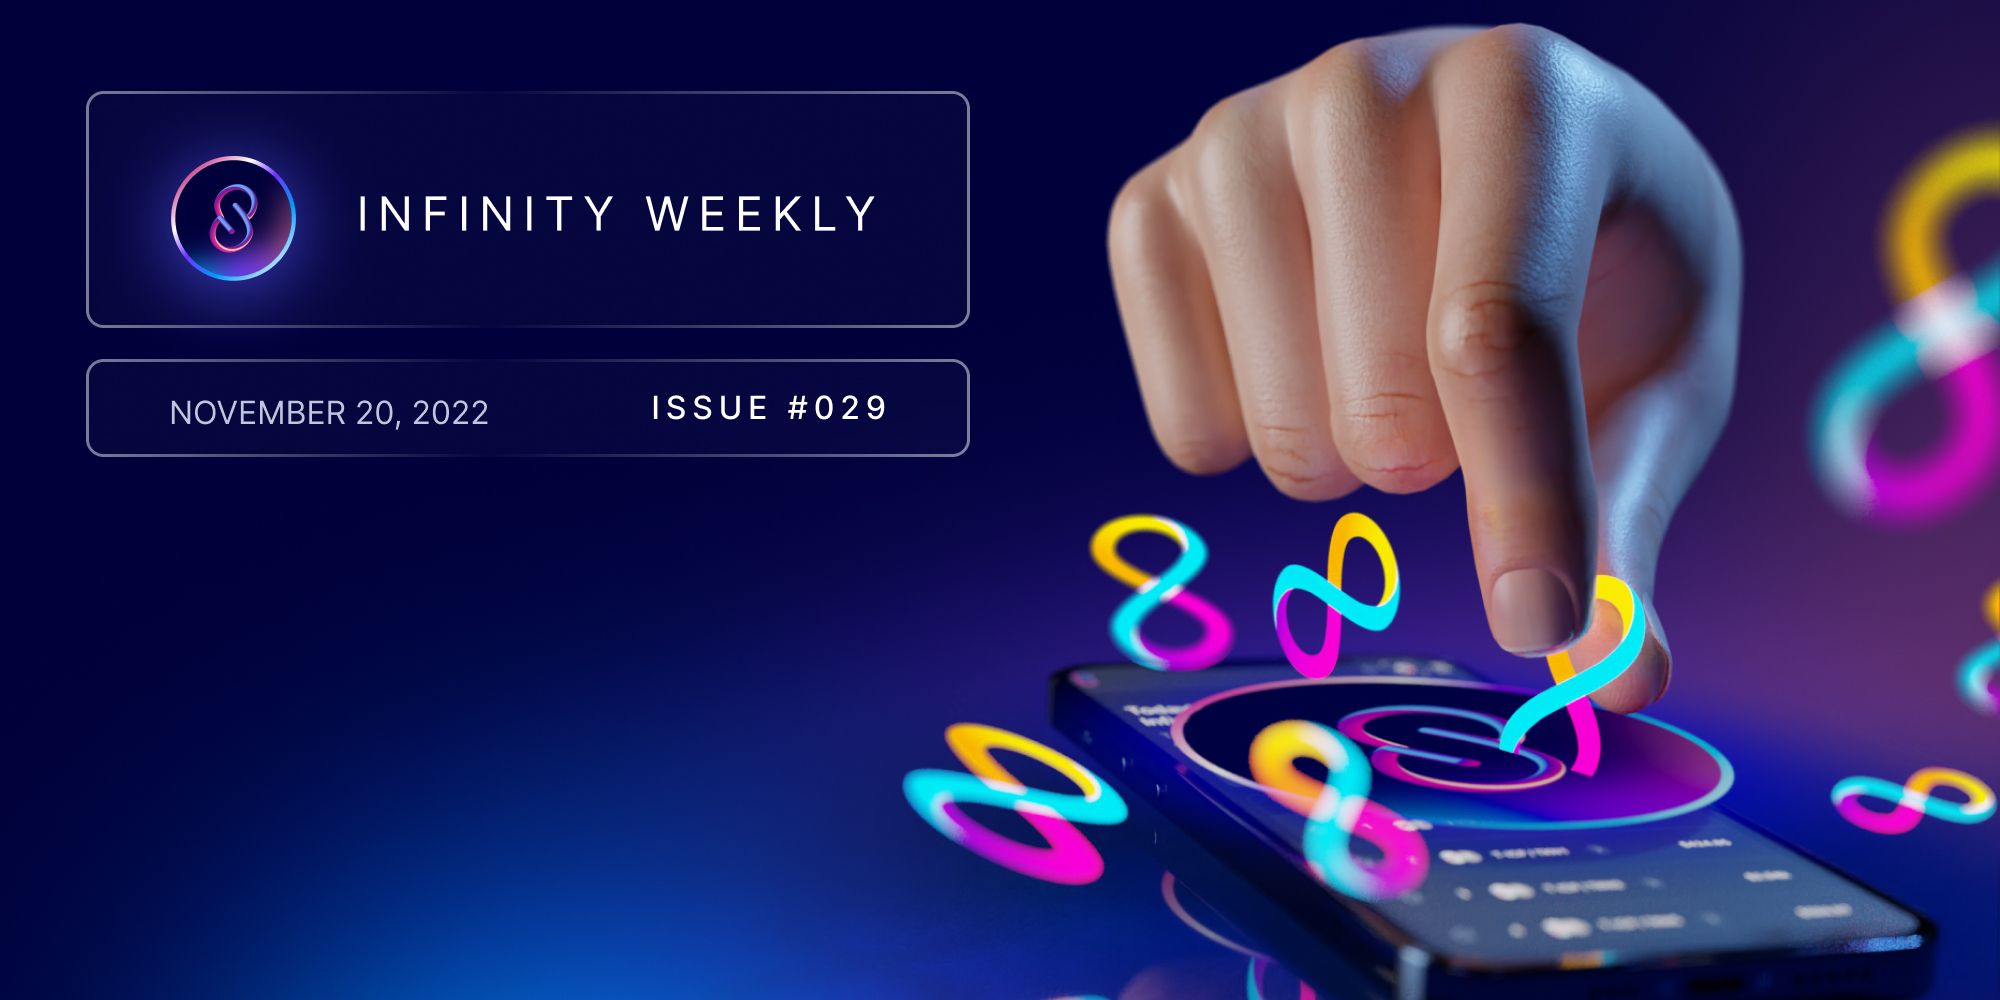 Infinity Weekly: Bit by Bit, #INFINISWAPPERS